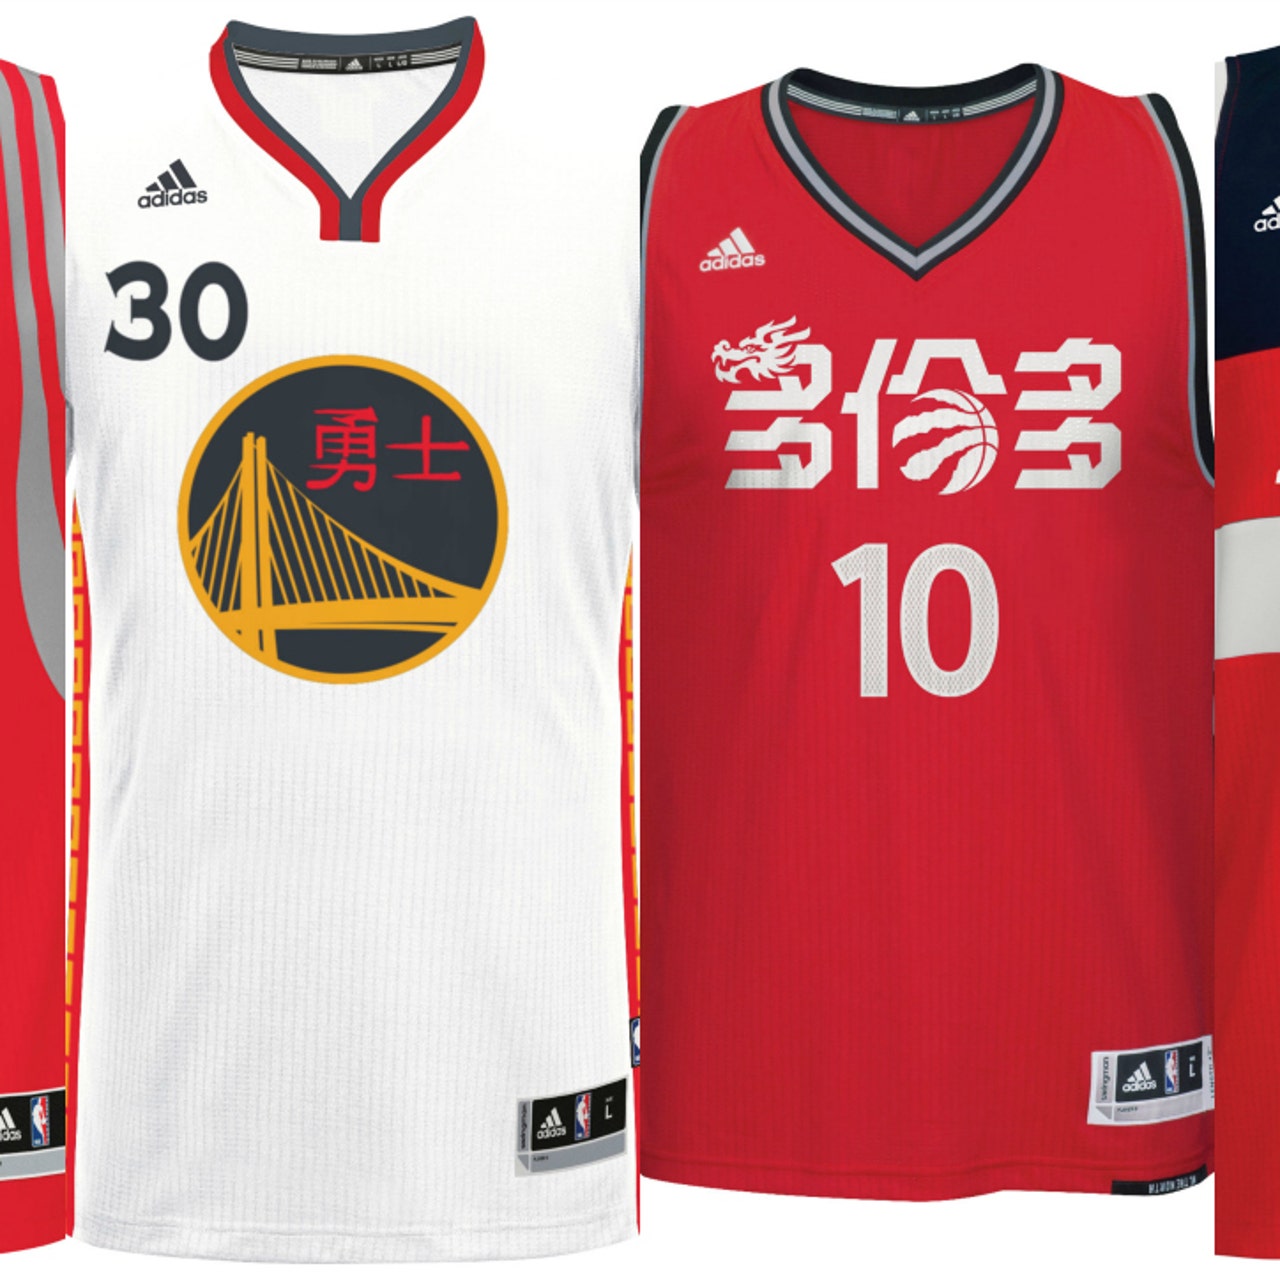 Warriors & Rockets Help Bring In The Lunar New Year With New Jerseys -  BasketballBuzz